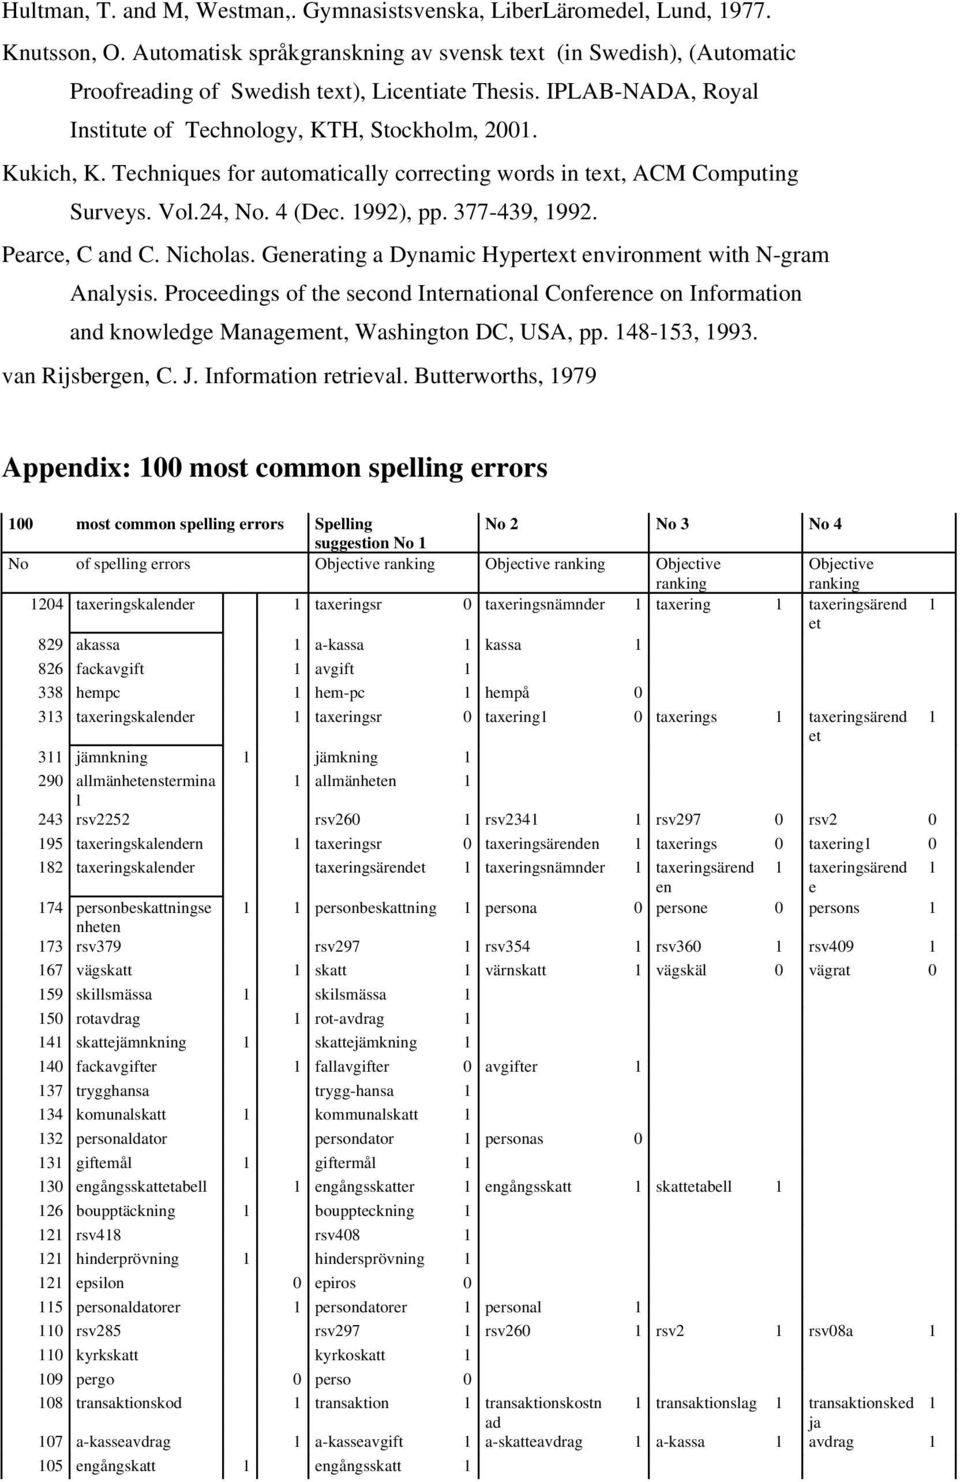 Techniques for automatically correcting words in text, ACM Computing Surveys. Vol.24, No. 4 (Dec. 1992), pp. 377-439, 1992. Pearce, C and C. Nicholas.